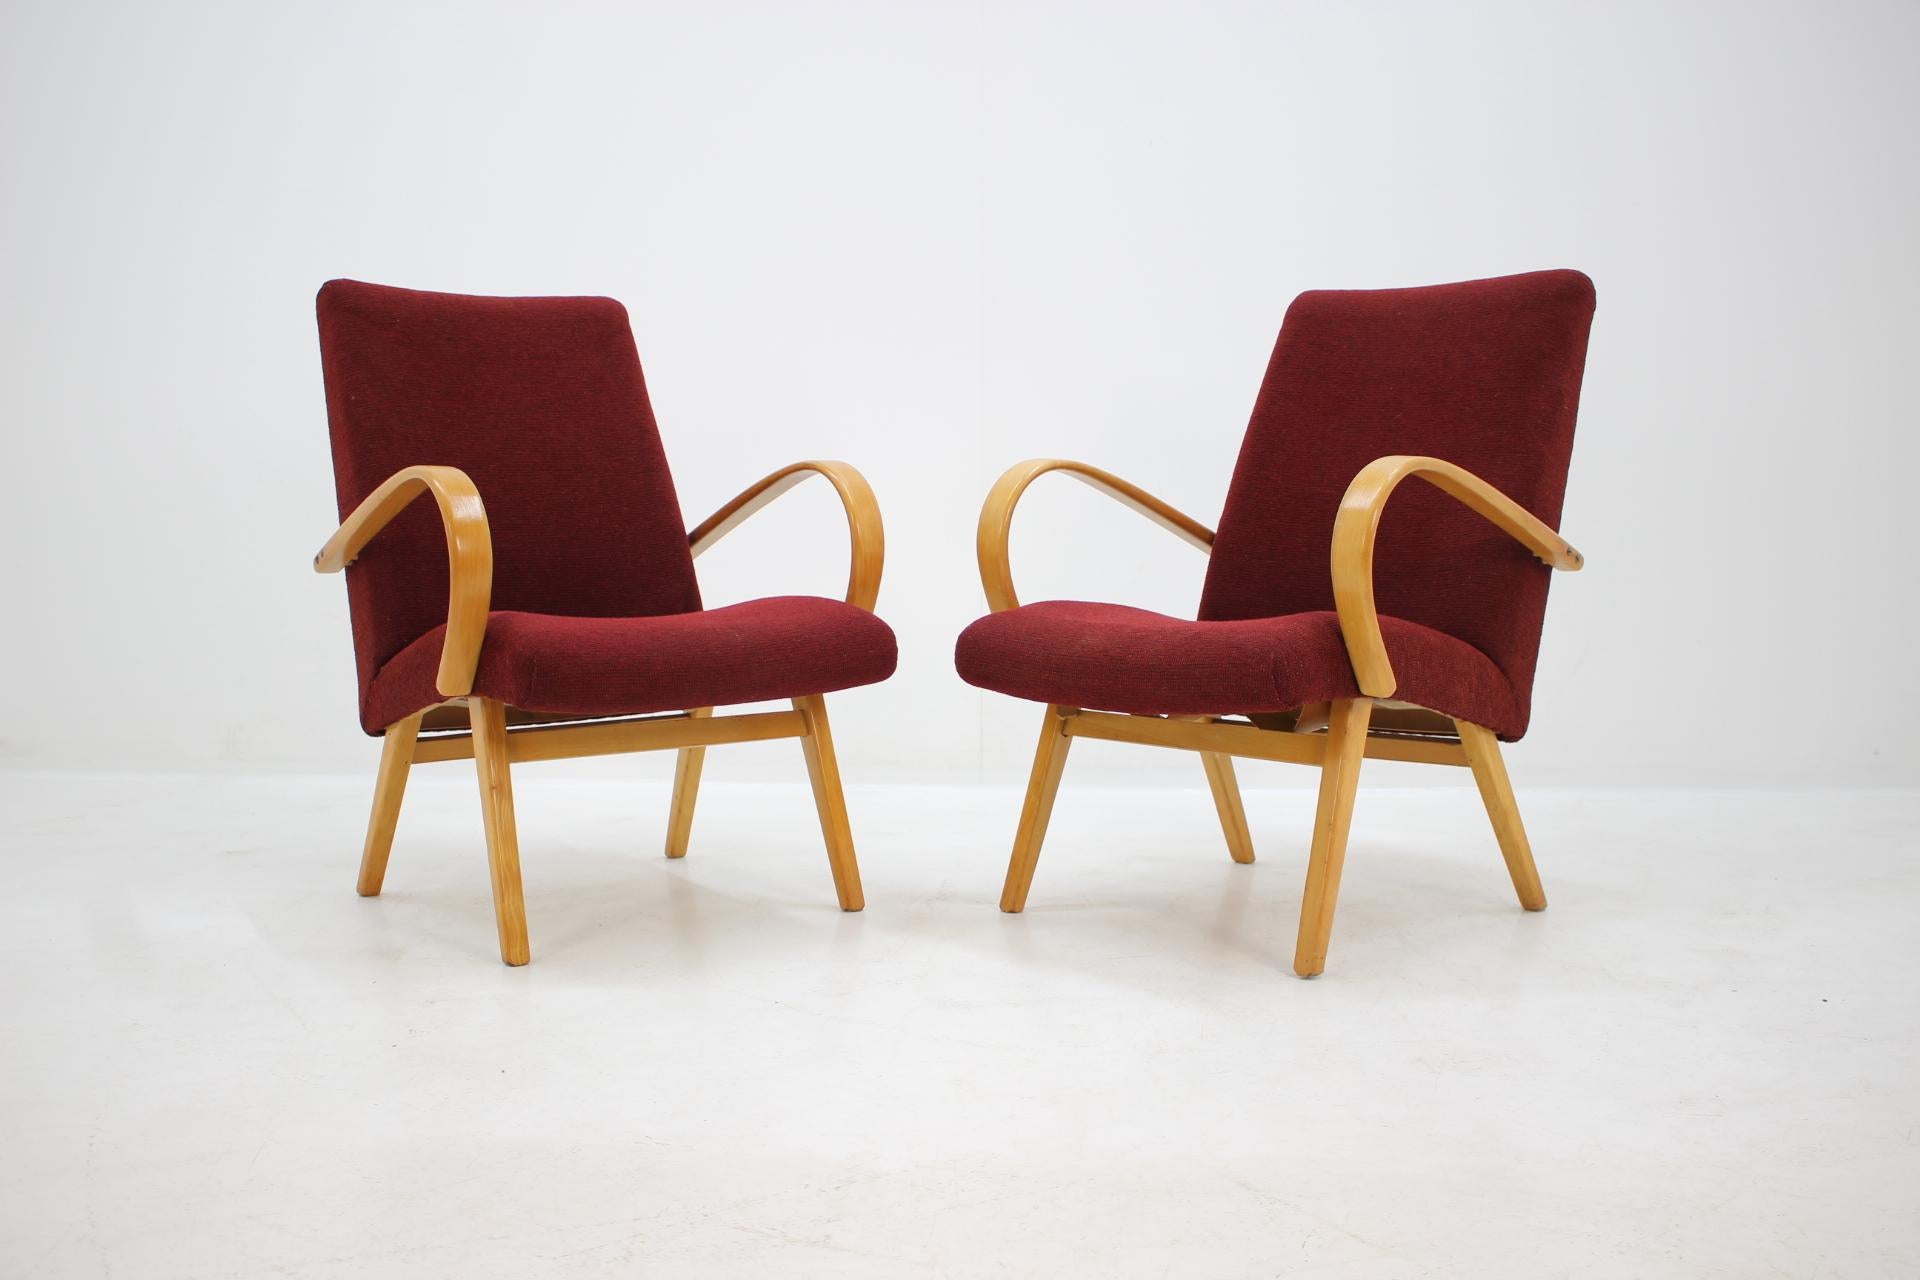 - 1960s, Czechoslovakia
- Very good original condition
- Suitable for a new upholstery.